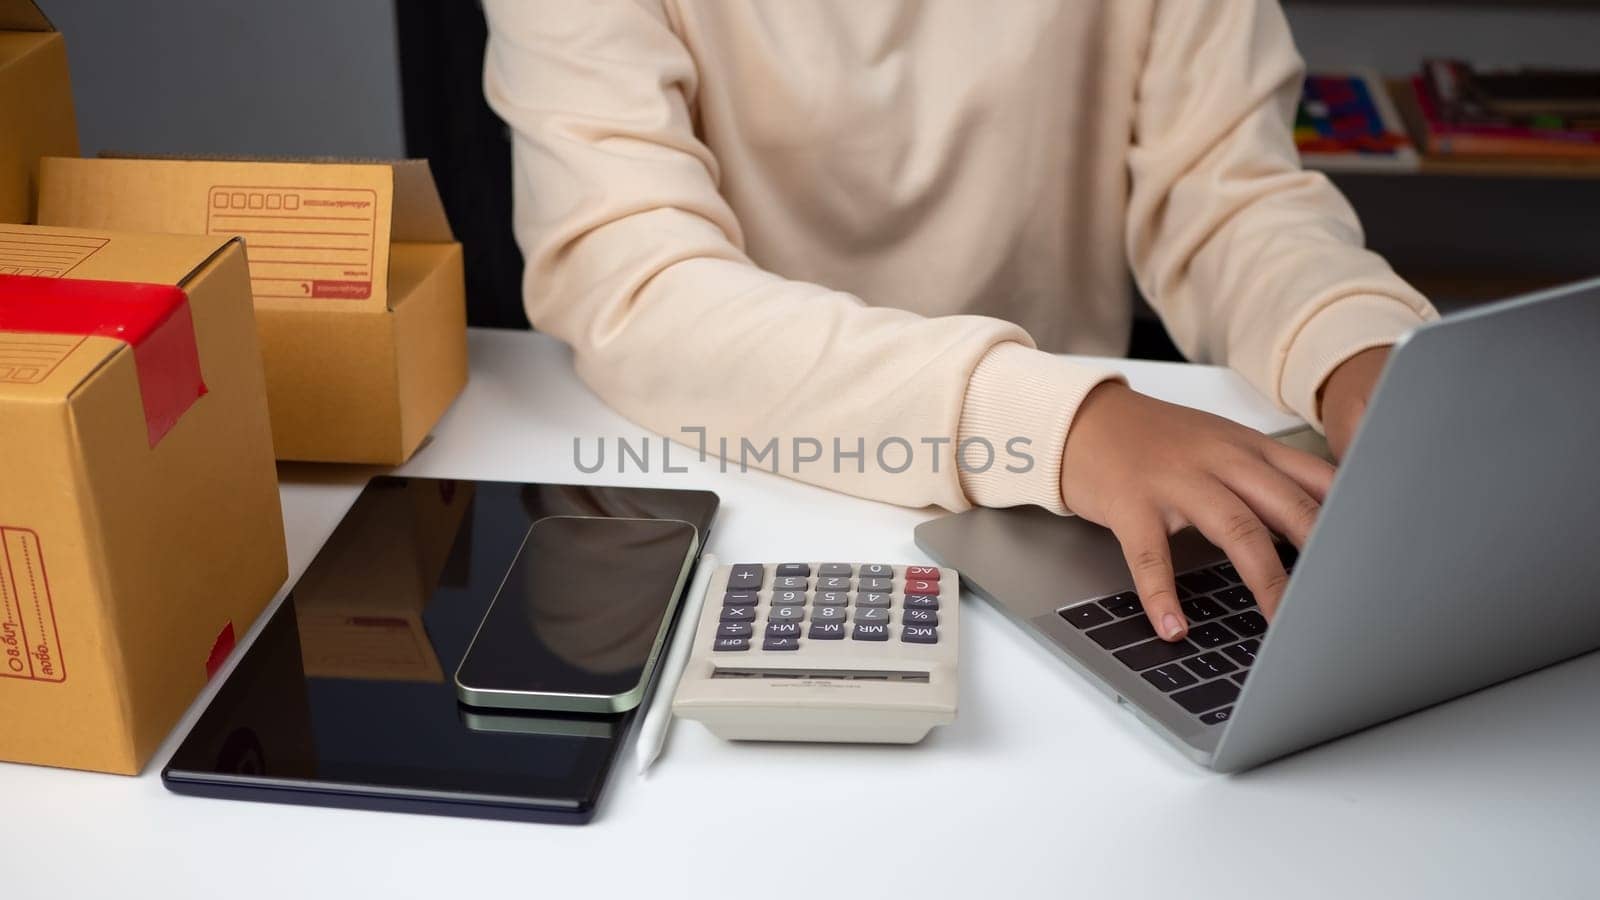 Woman runs an e-commerce business is checking orders from laptop, she owns an online store, she packs and ships through a private transport company. Online selling and online shopping concepts. by Unimages2527